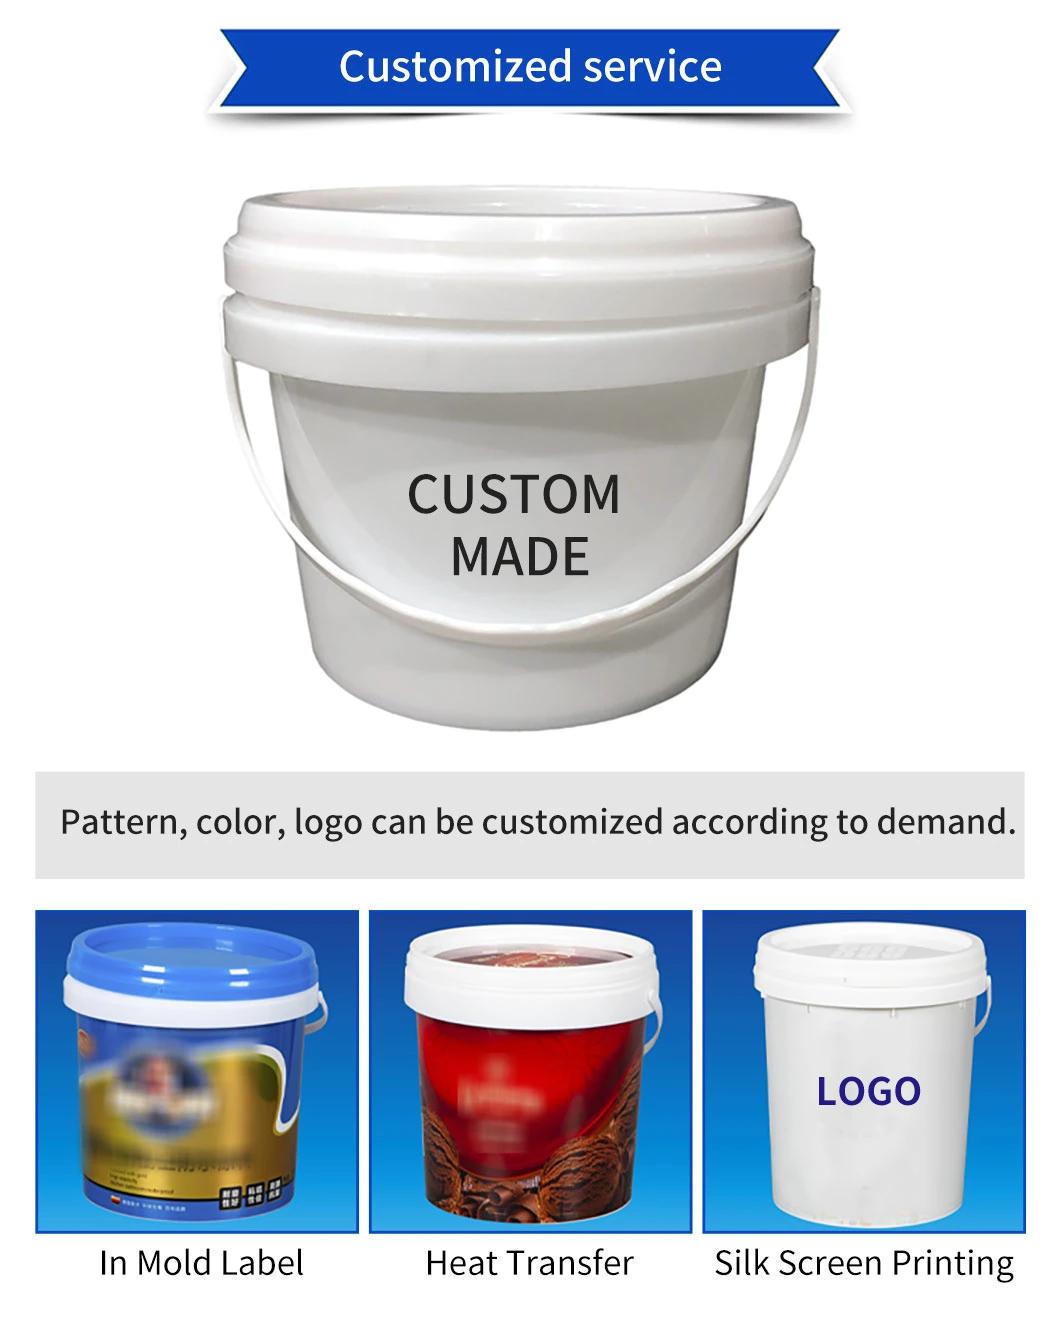 Plastic Buckets with Lids for Food Storage